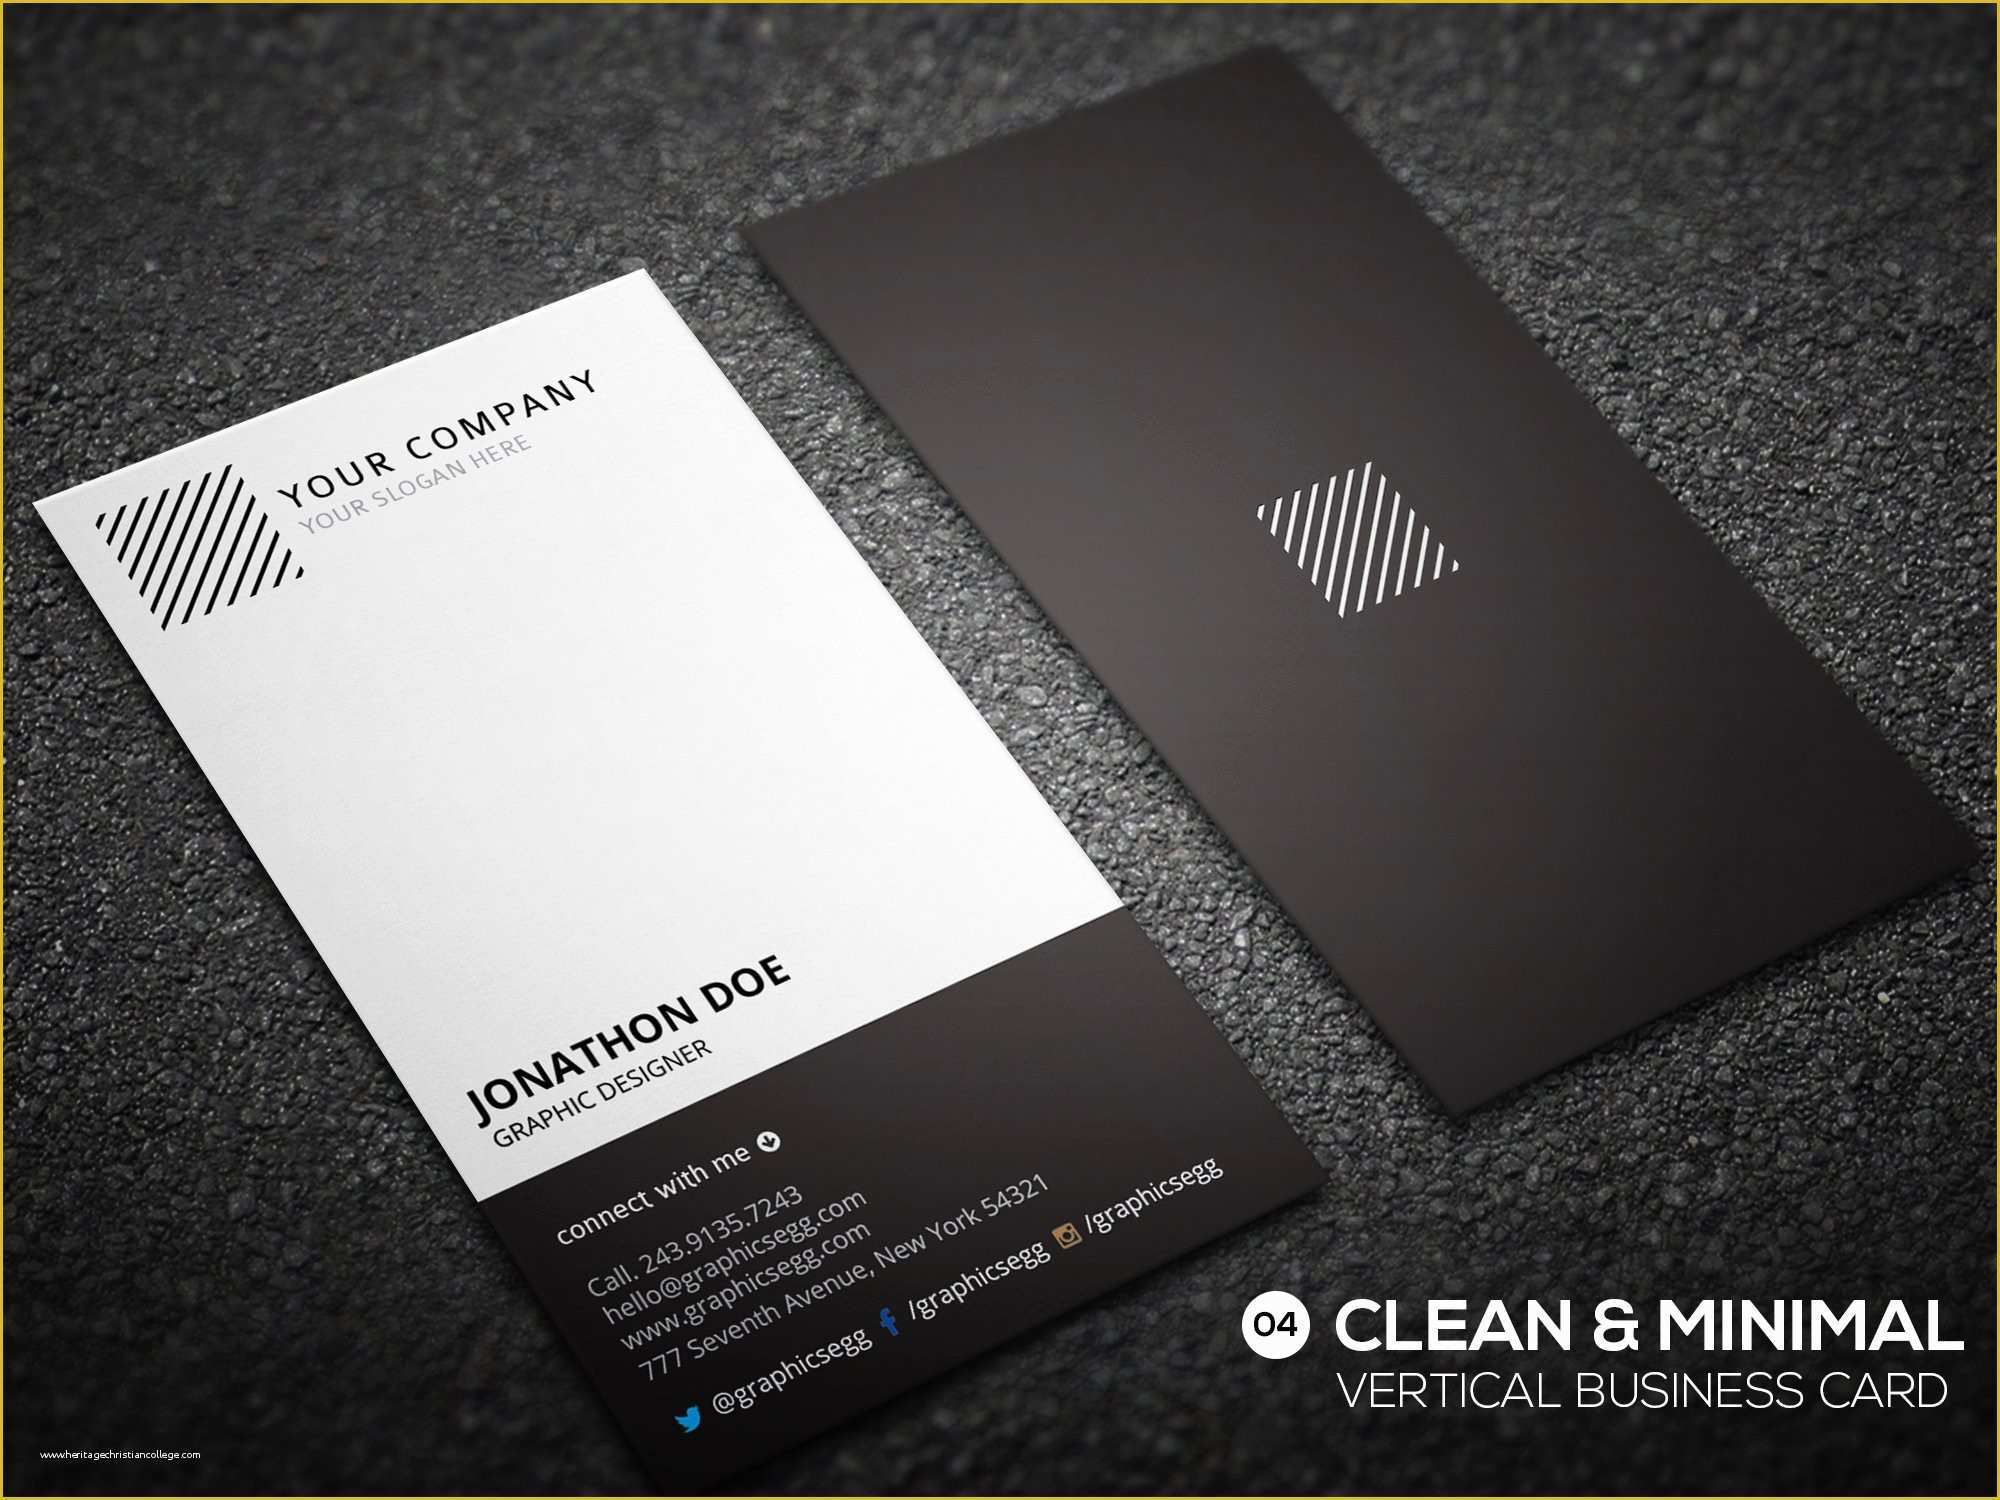 Free Vertical Business Card Template Of Clean Minimal Vertical Business Card Business Card